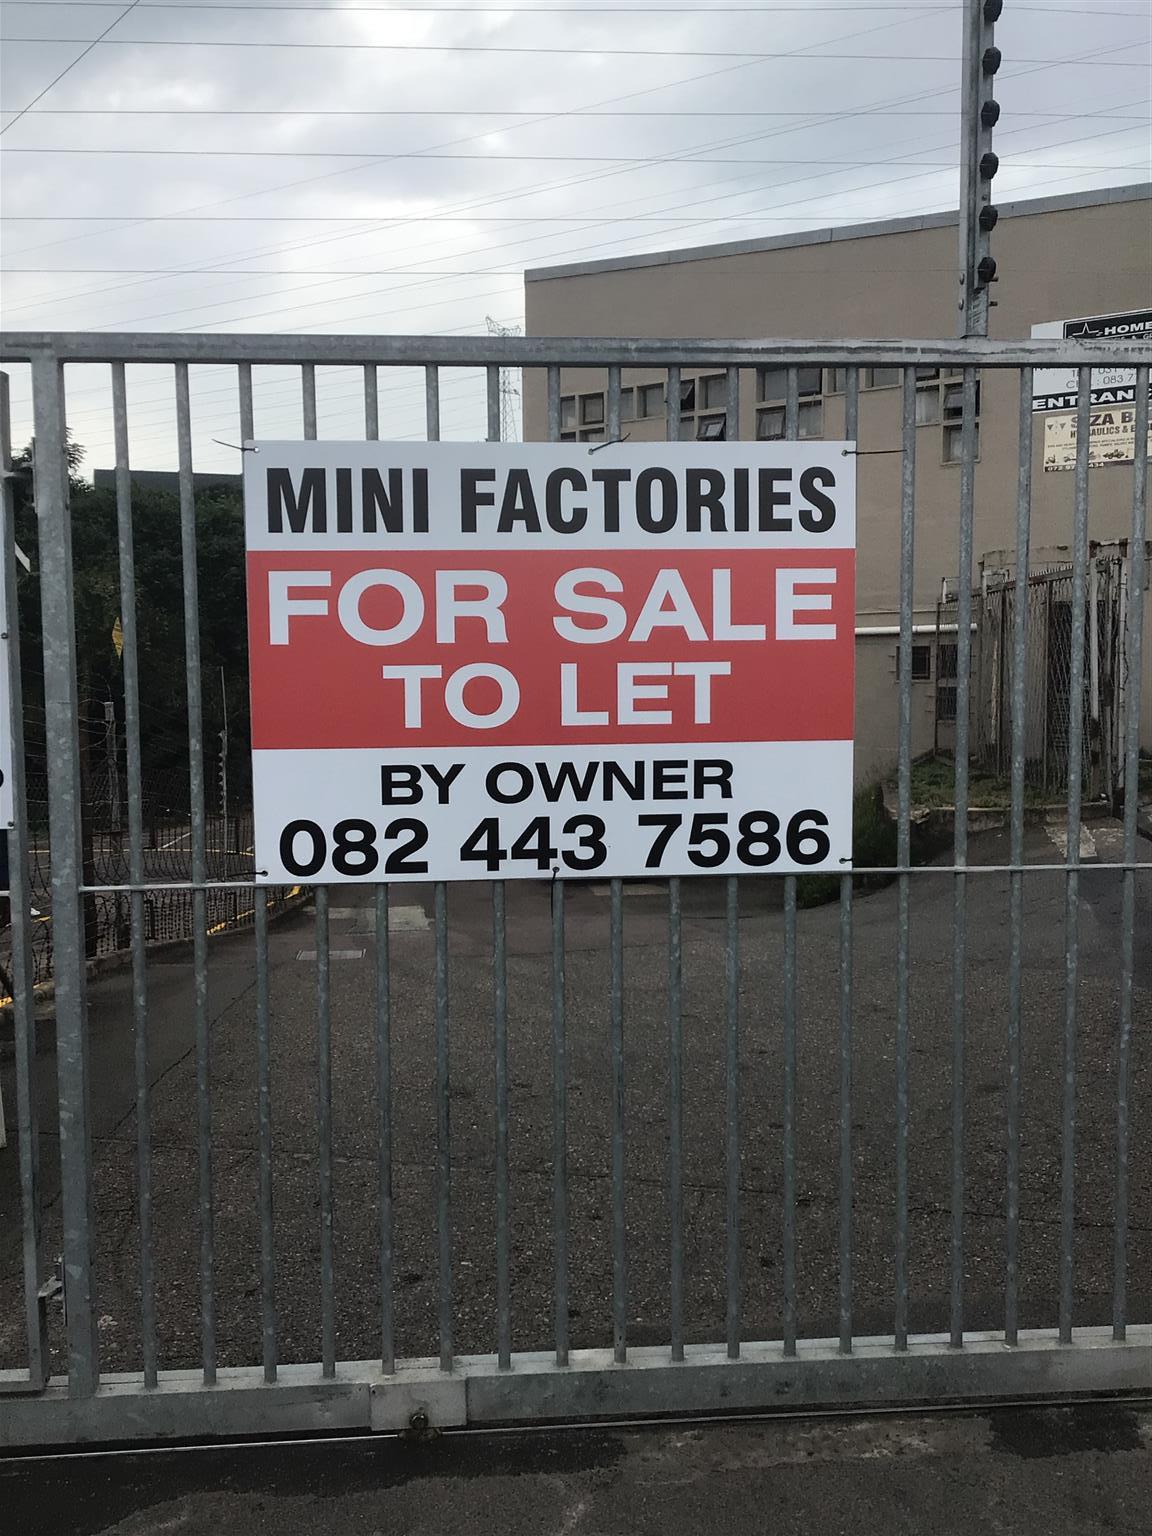 Mini Factories New Germany for sale or rent